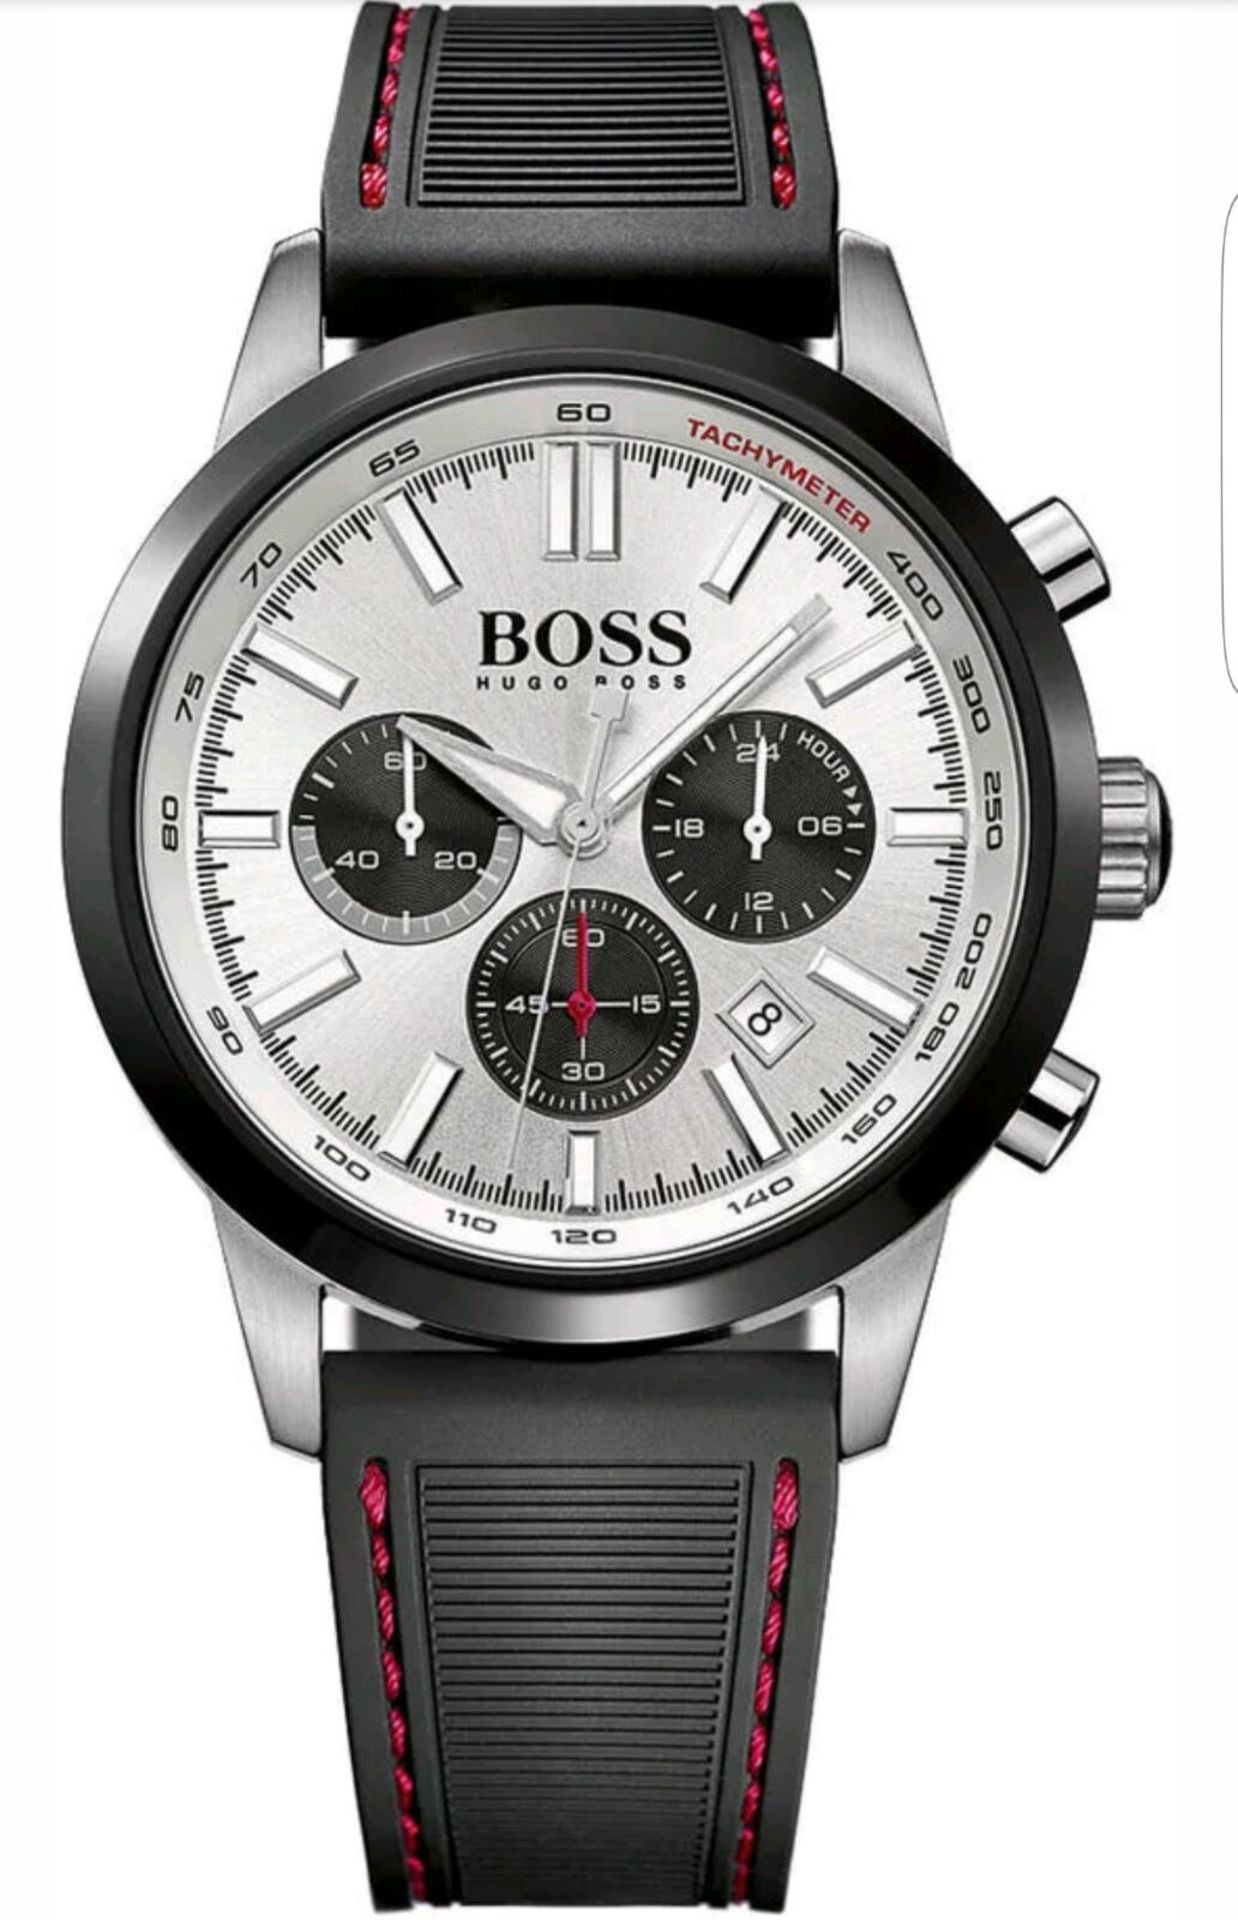 BRAND NEW GENTS HUGO BOSS WATCH 1513185, COMPLETE WITH ORIGINAL PACKAGING AND MANUAL - FREE P & P